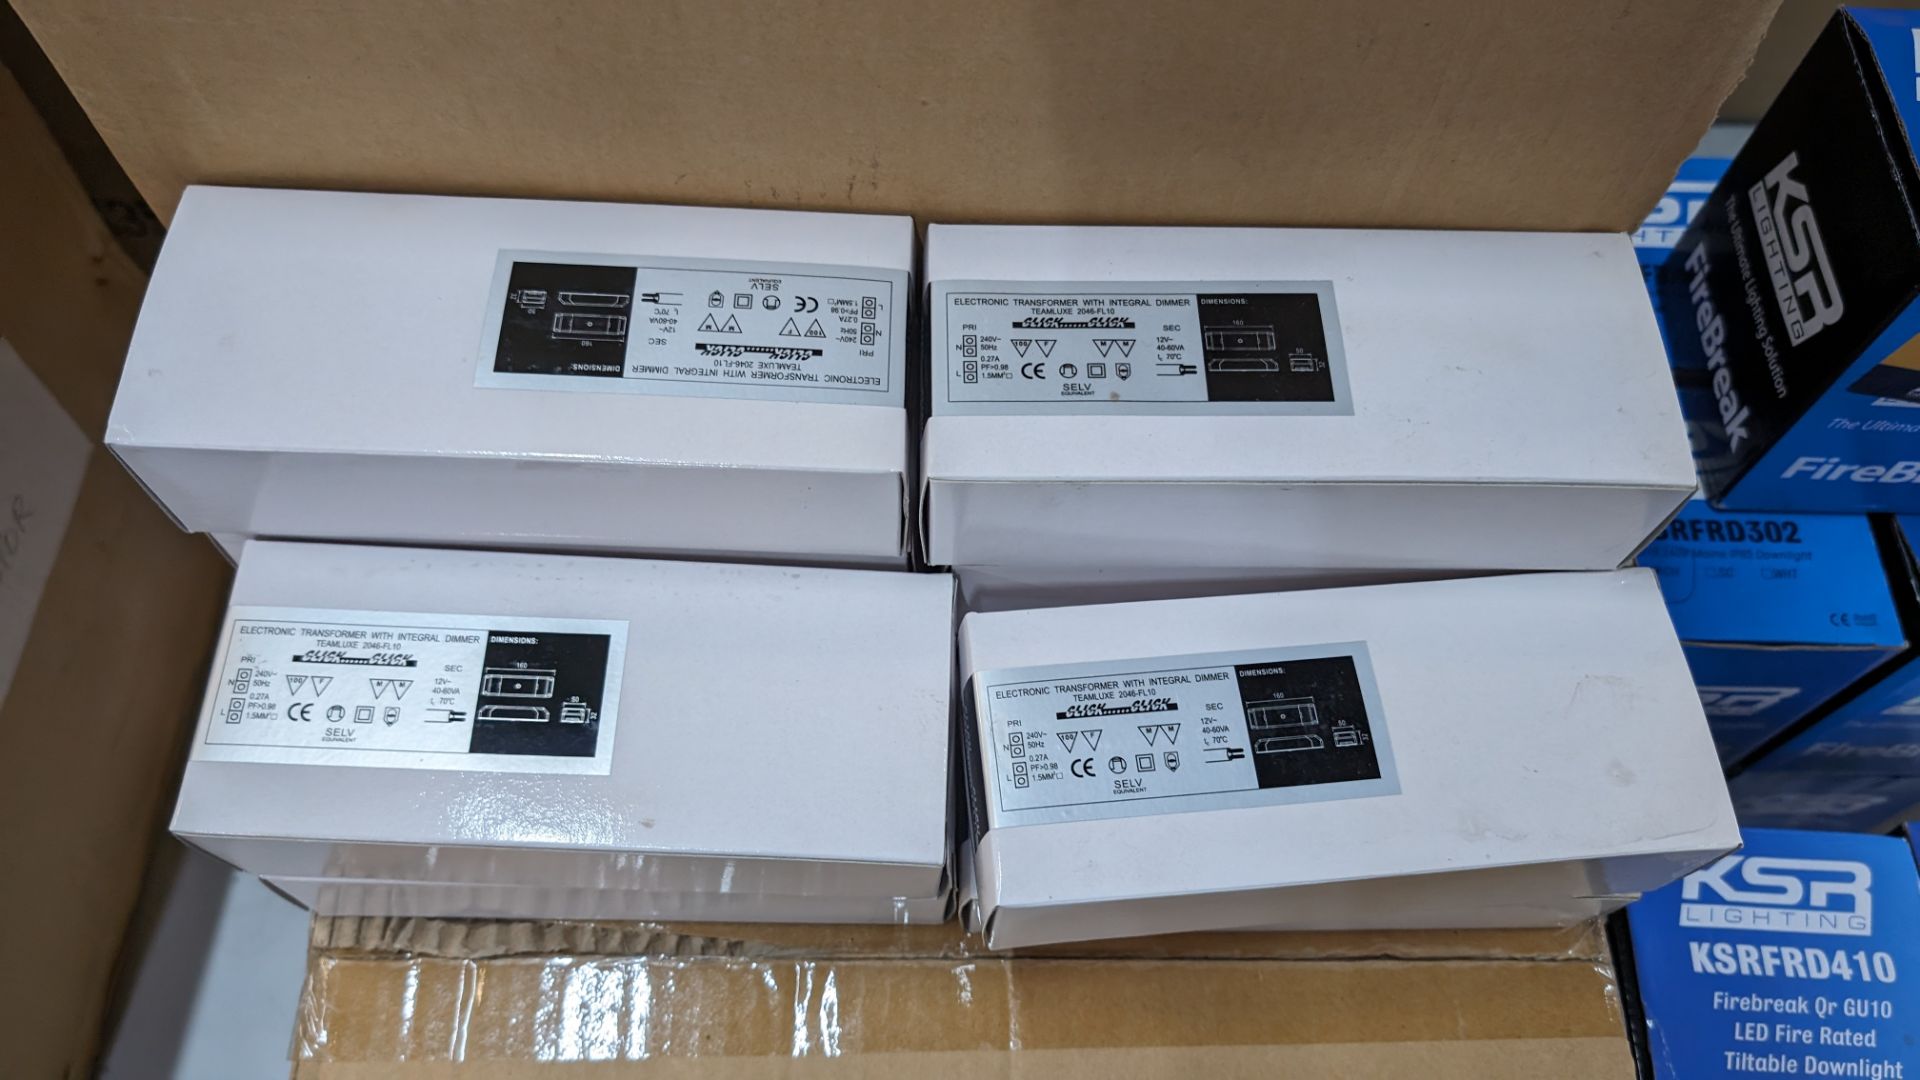 210 off Teamluxe electronic transformers with integral dimmer (5 boxes plus 10 loose transformers) - Bild 4 aus 5